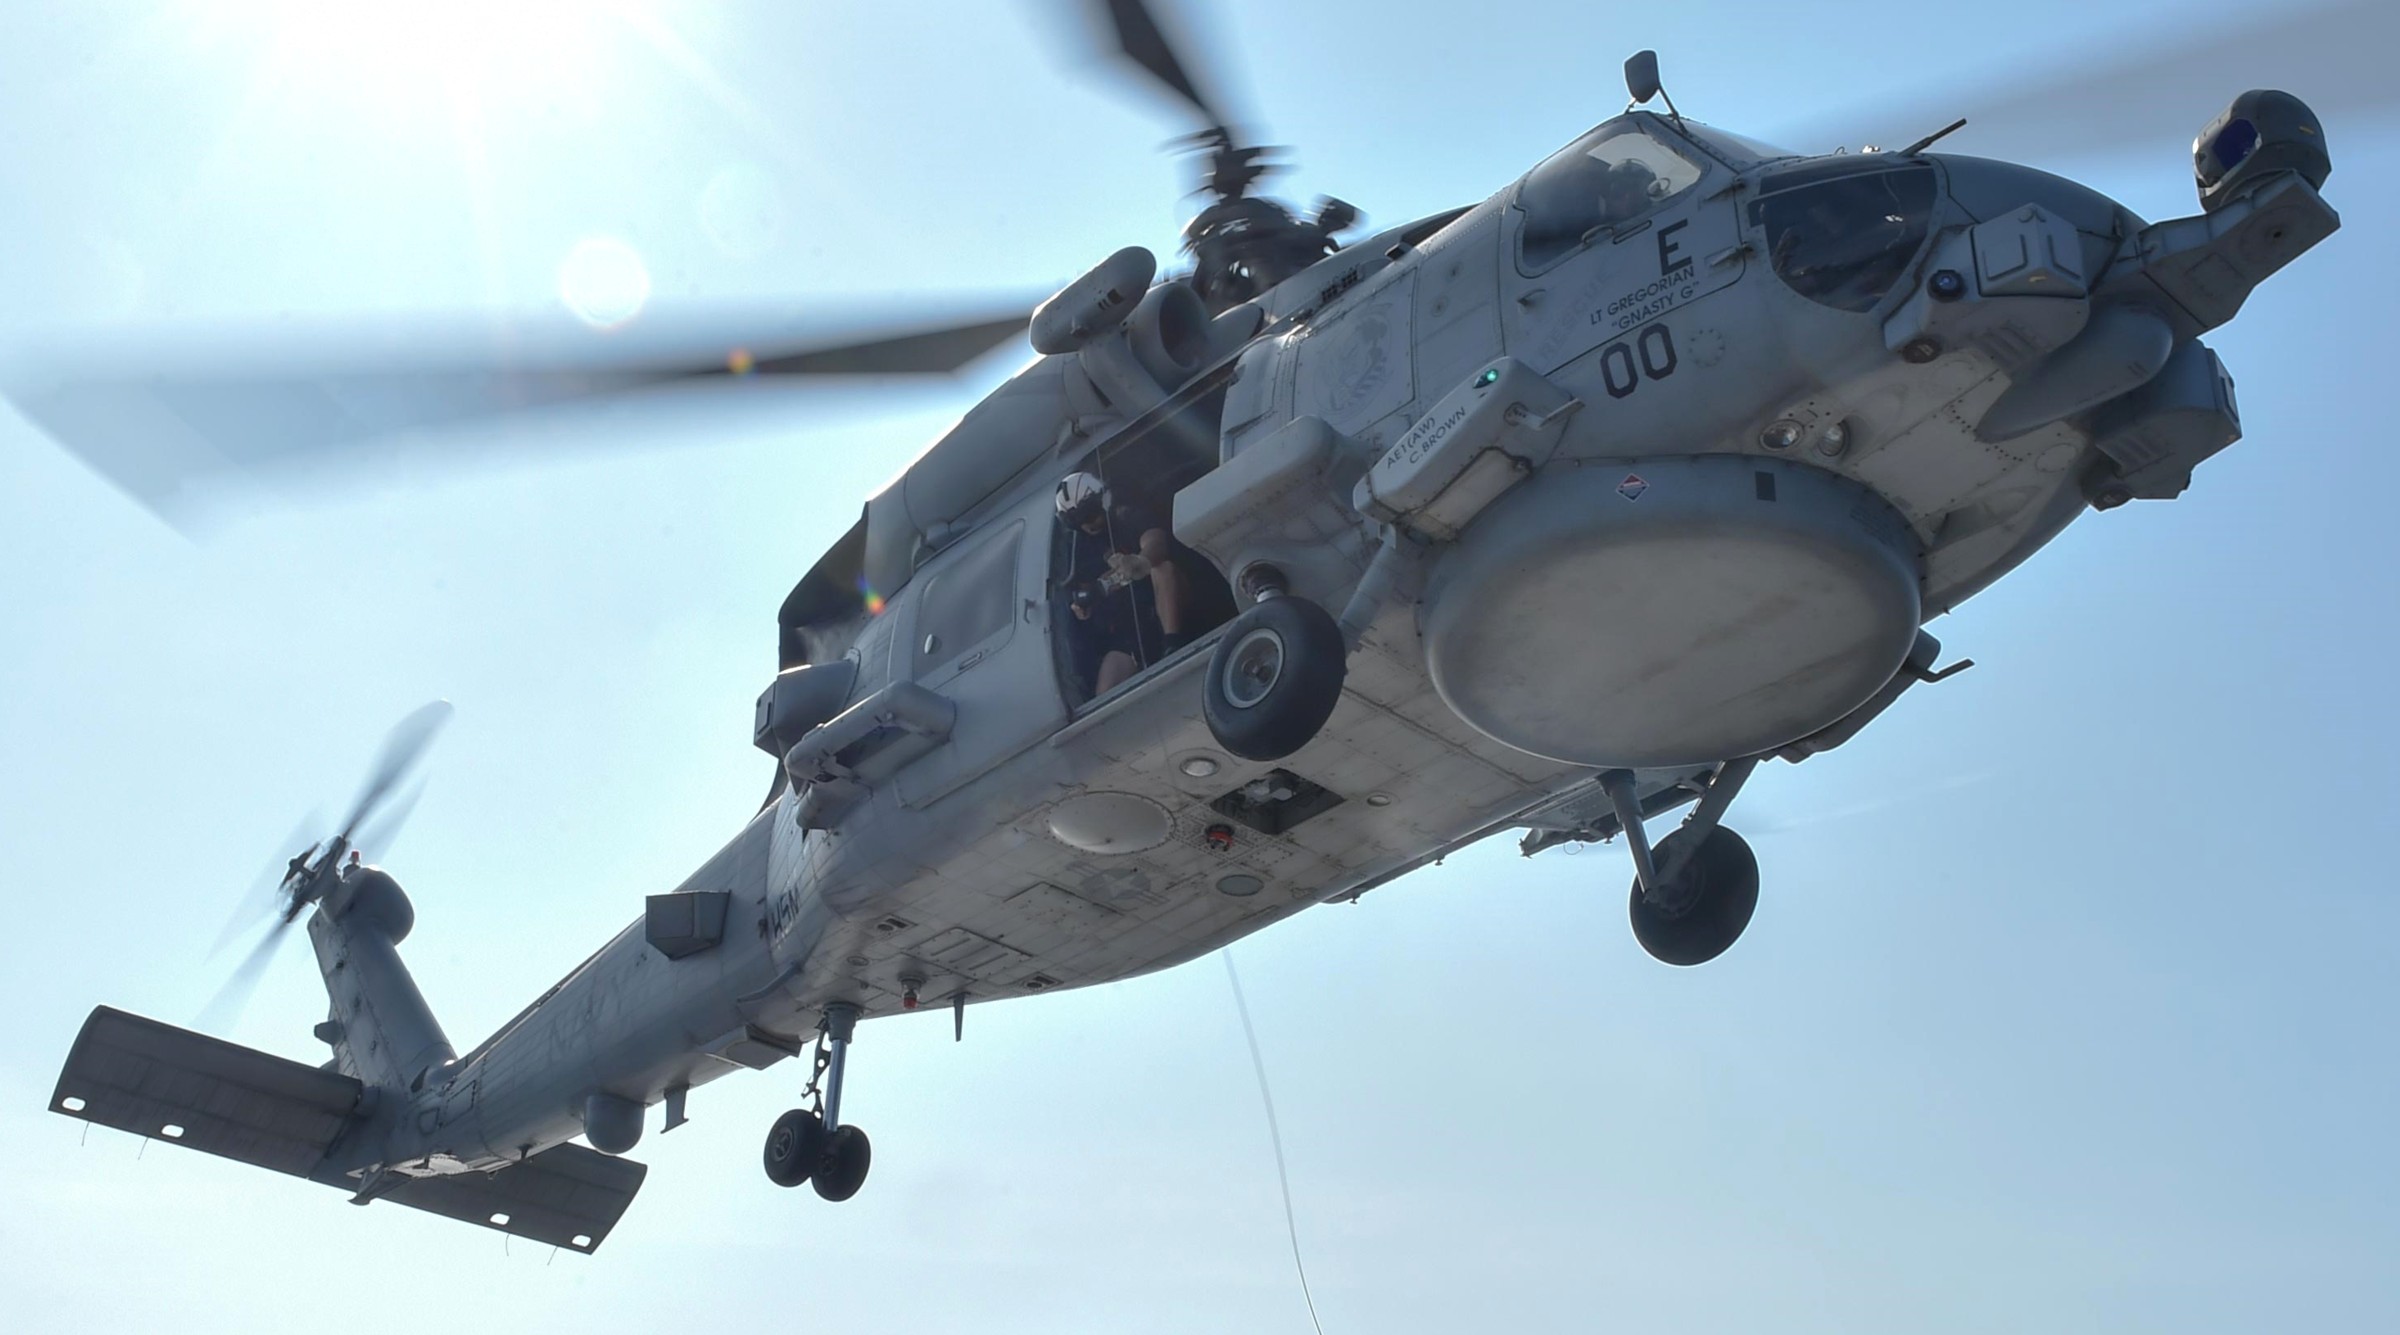 hsm-51 warlords helicopter maritime strike squadron mh-60r seahawk navy 2015 76